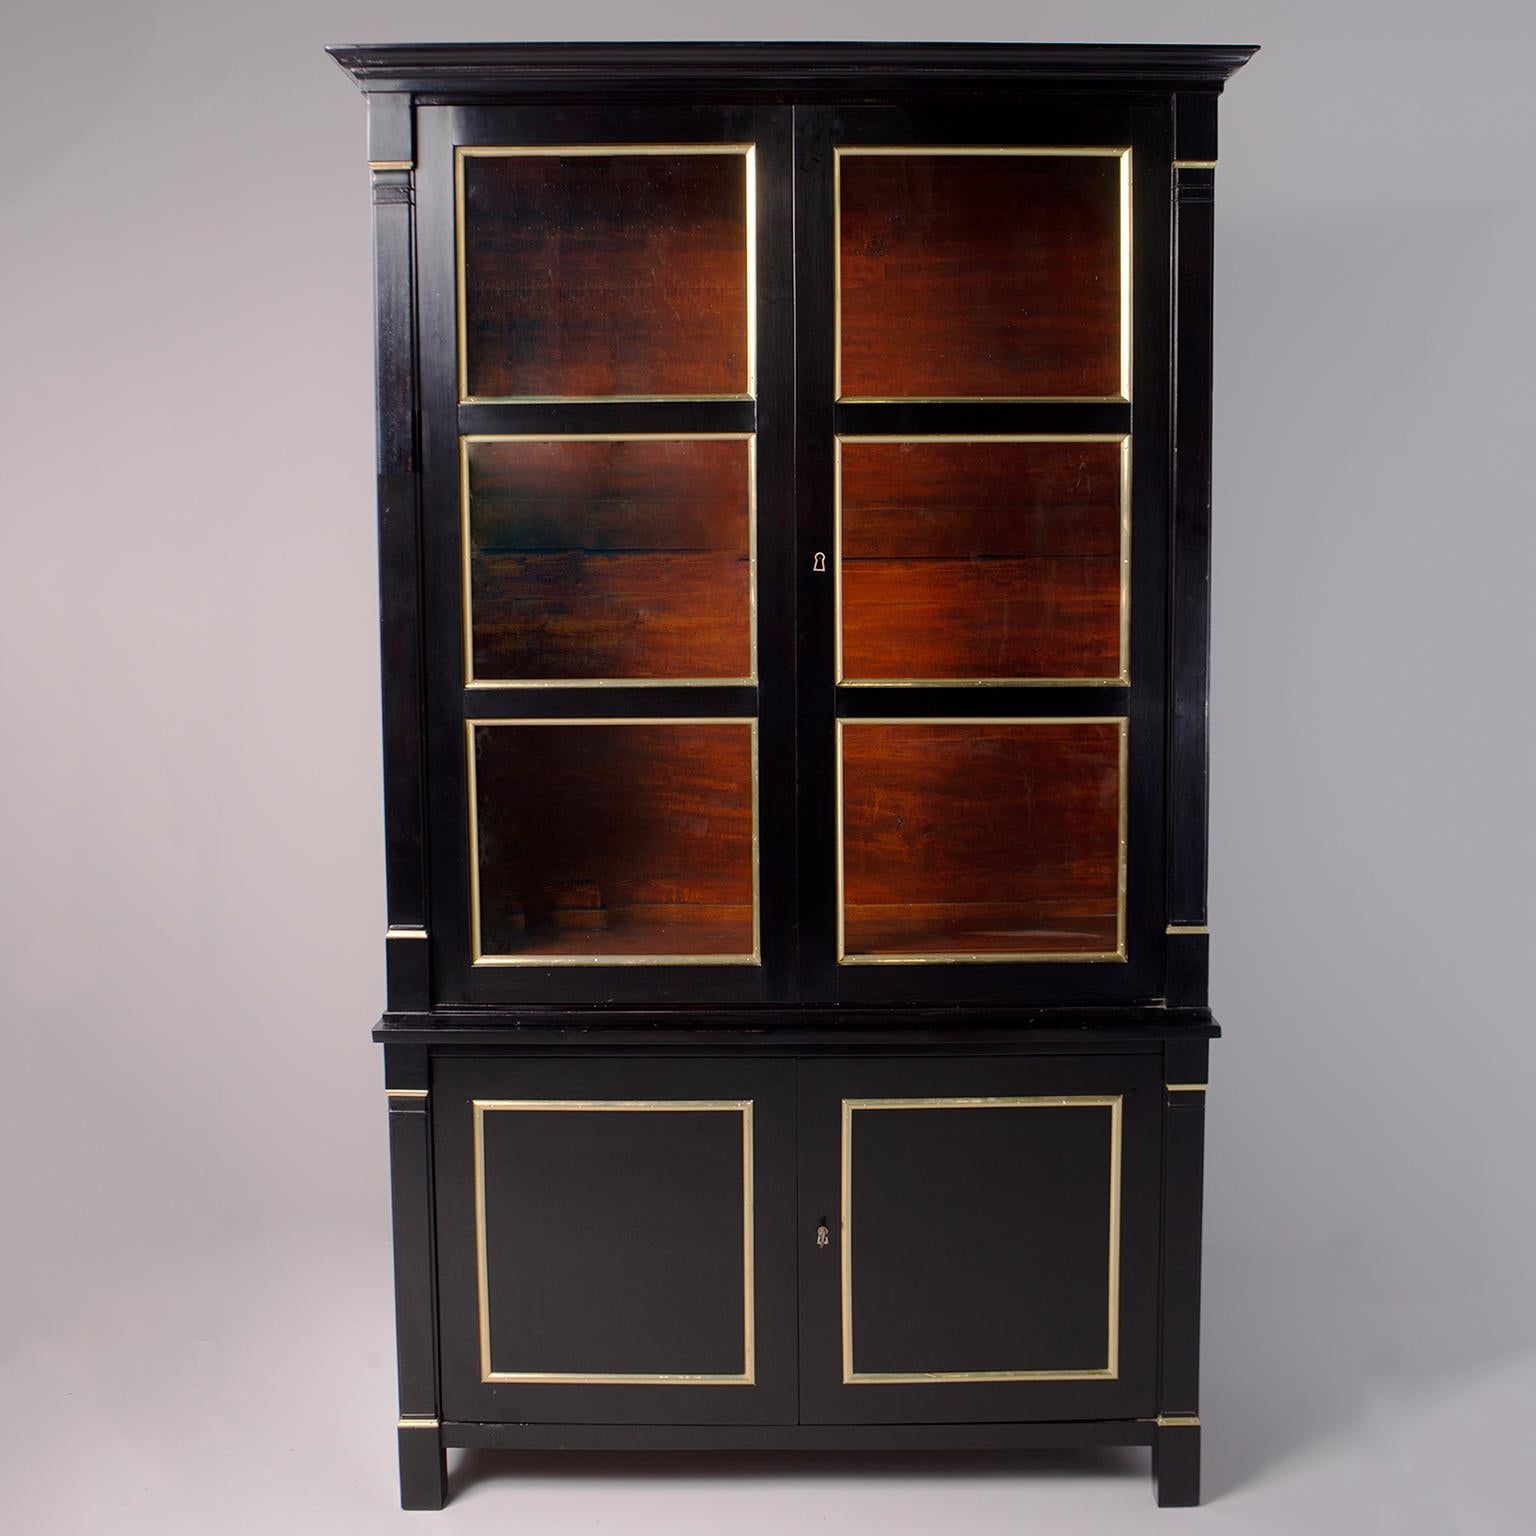 Neoclassical French bookcase is newly ebonised and trimmed in brass, circa 1920s. Cabinet consists of two pieces that can be separated for moving and shipping. The bottom base has two hinged locking cabinet doors with single internal shelf. The top